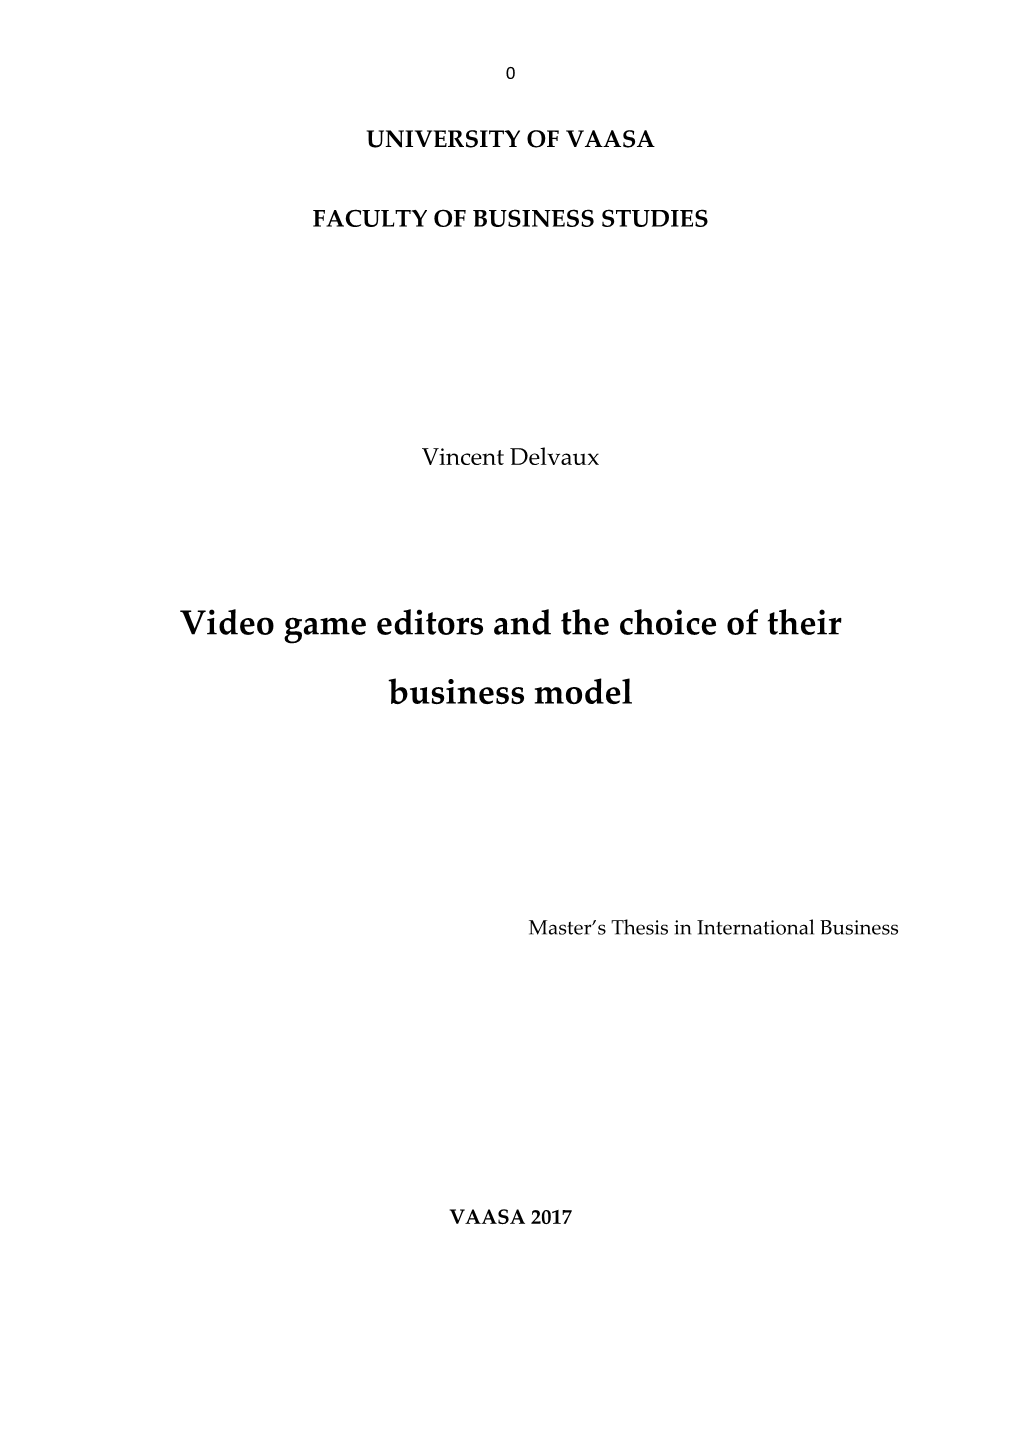 Video Game Editors and the Choice of Their Business Model